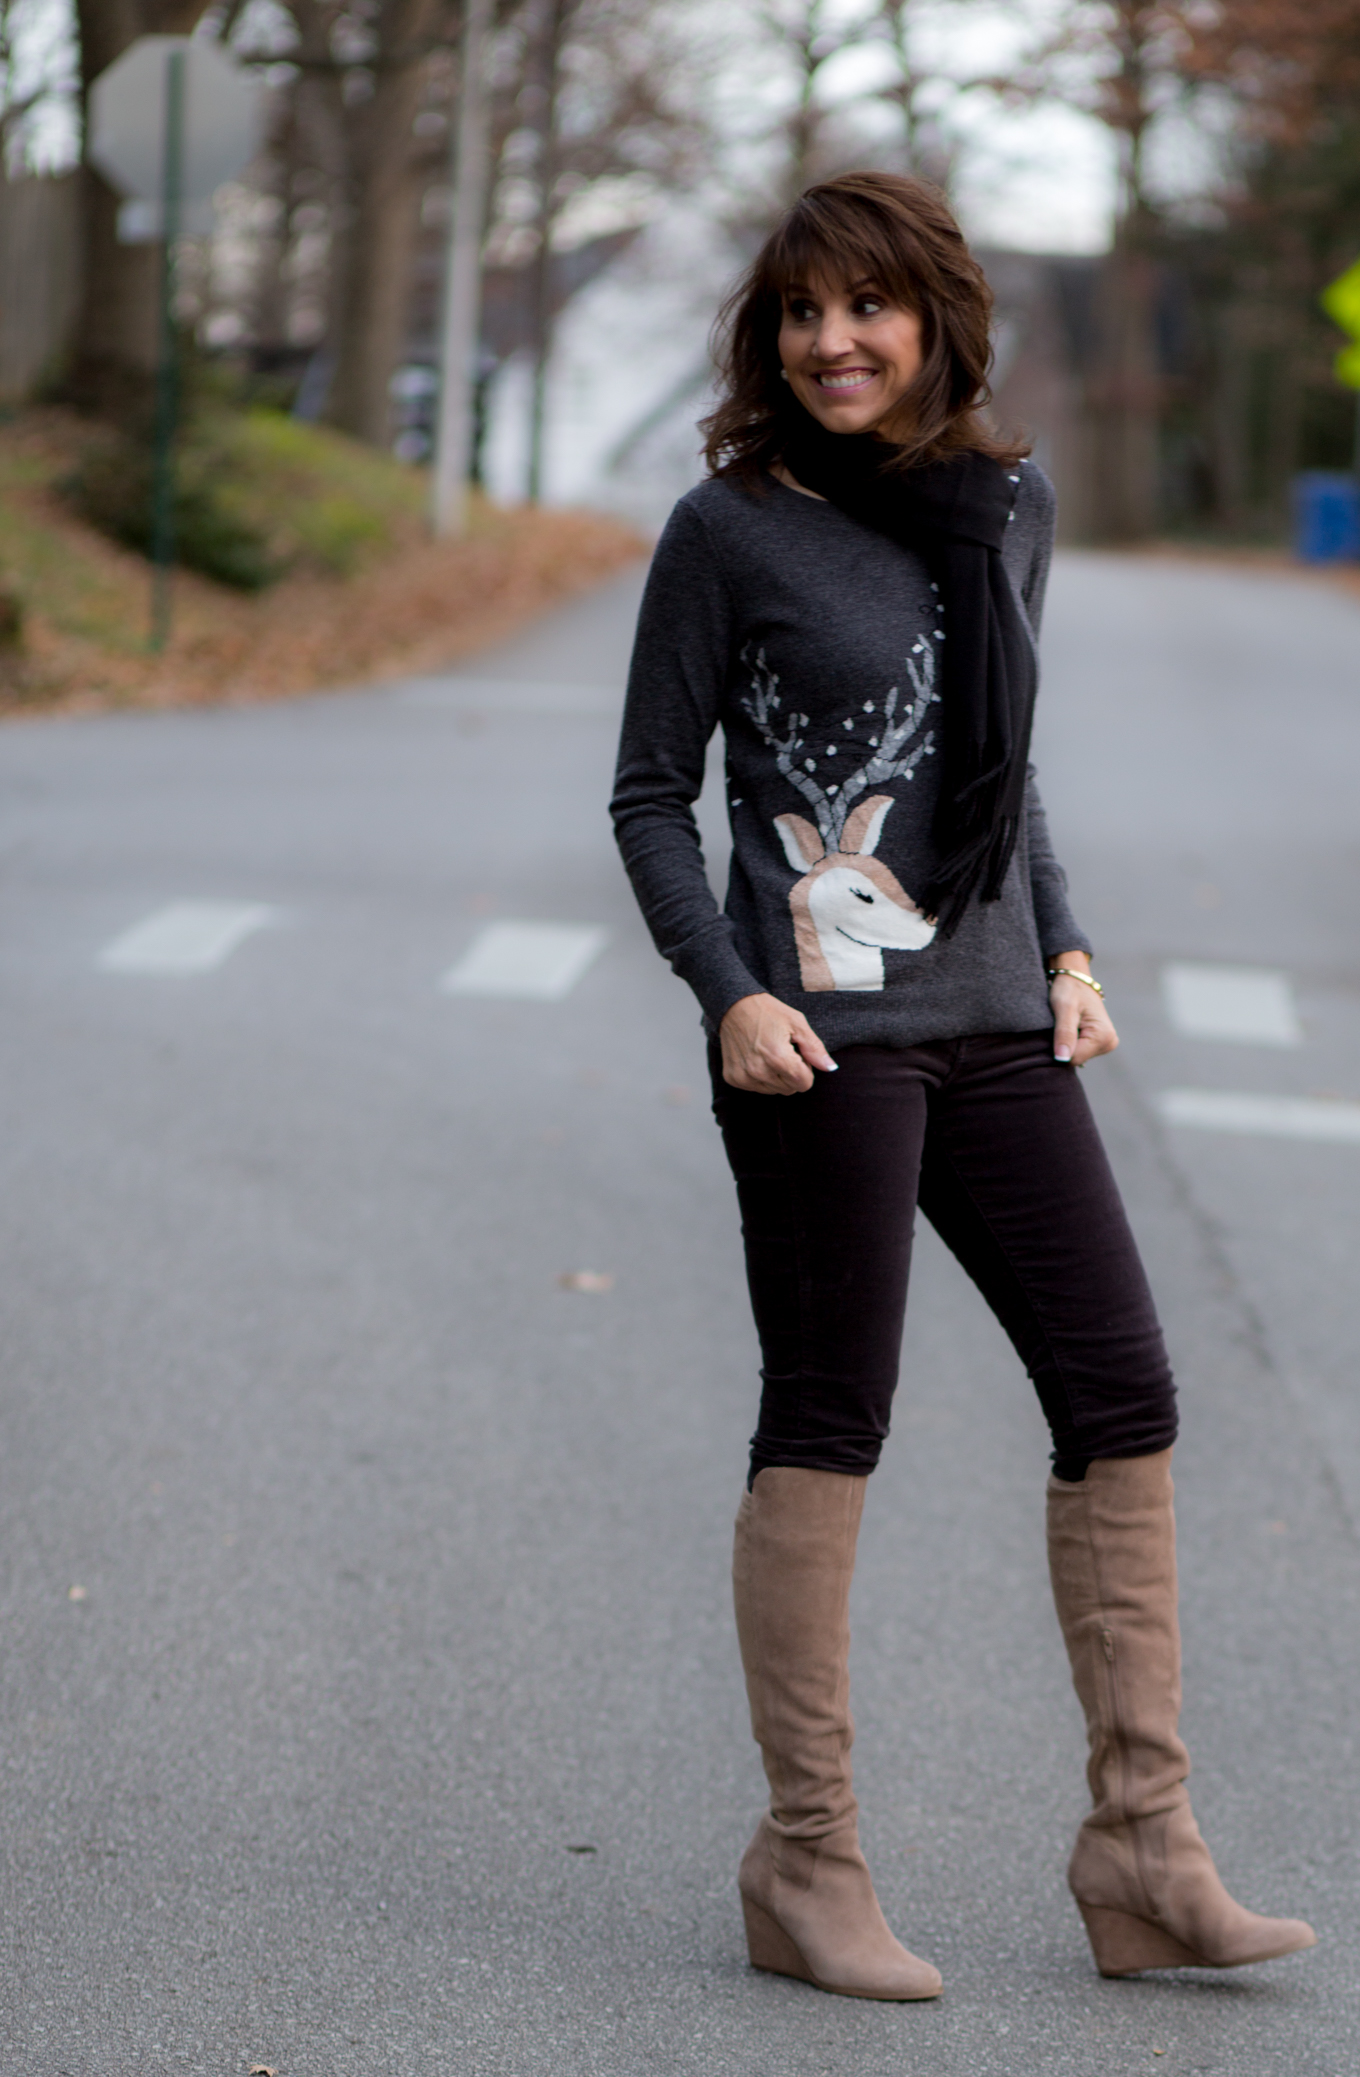 25 Days of Winter Fashion: Reindeer Sweater + Corduroy Pants + Red Coat